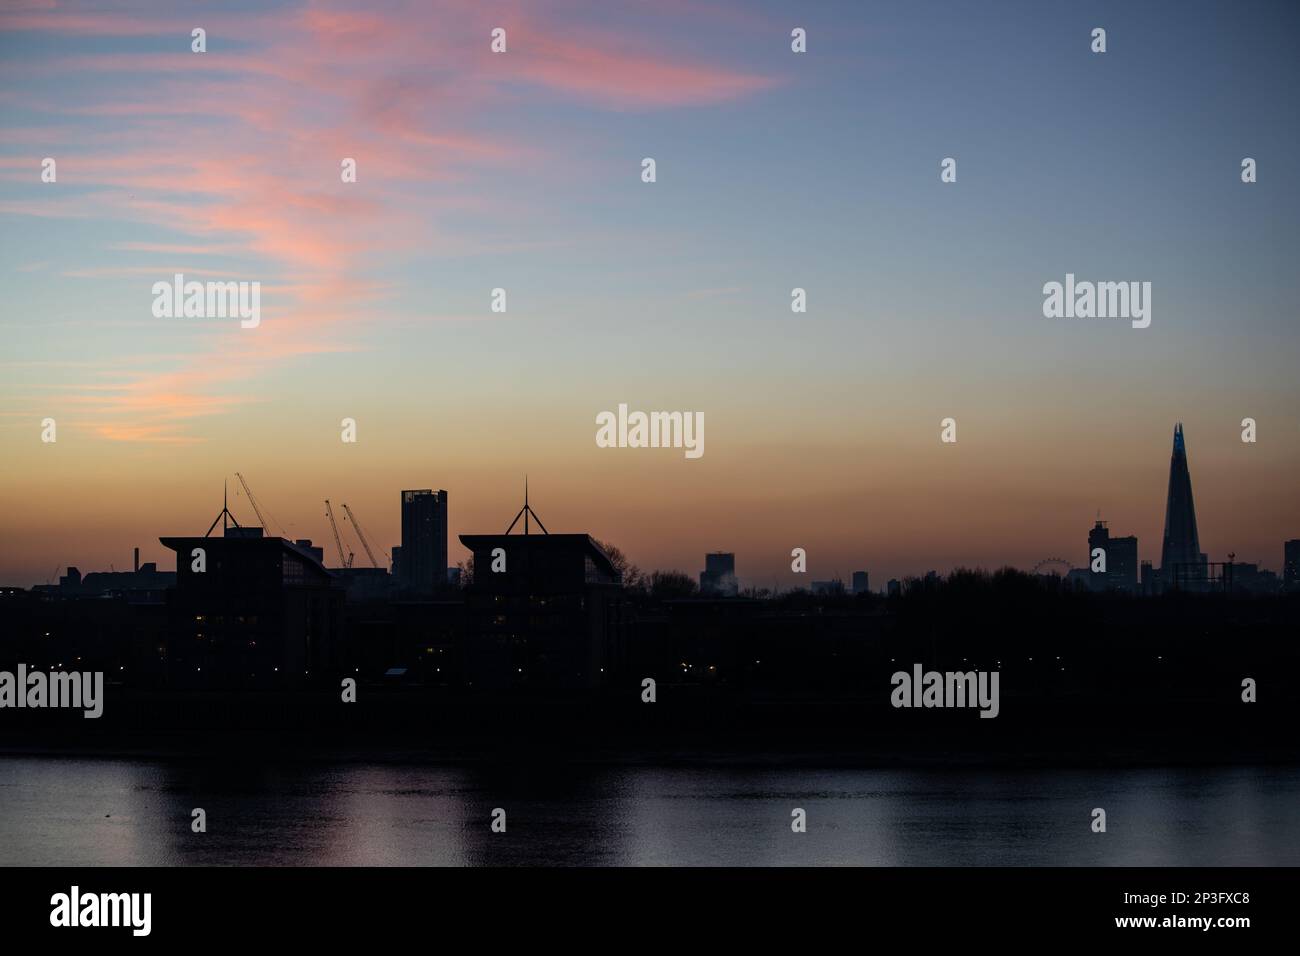 Pink cirrostratus clouds over the river Thames and south east London. The buildings are silhouetted against the sunset sky. Stock Photo